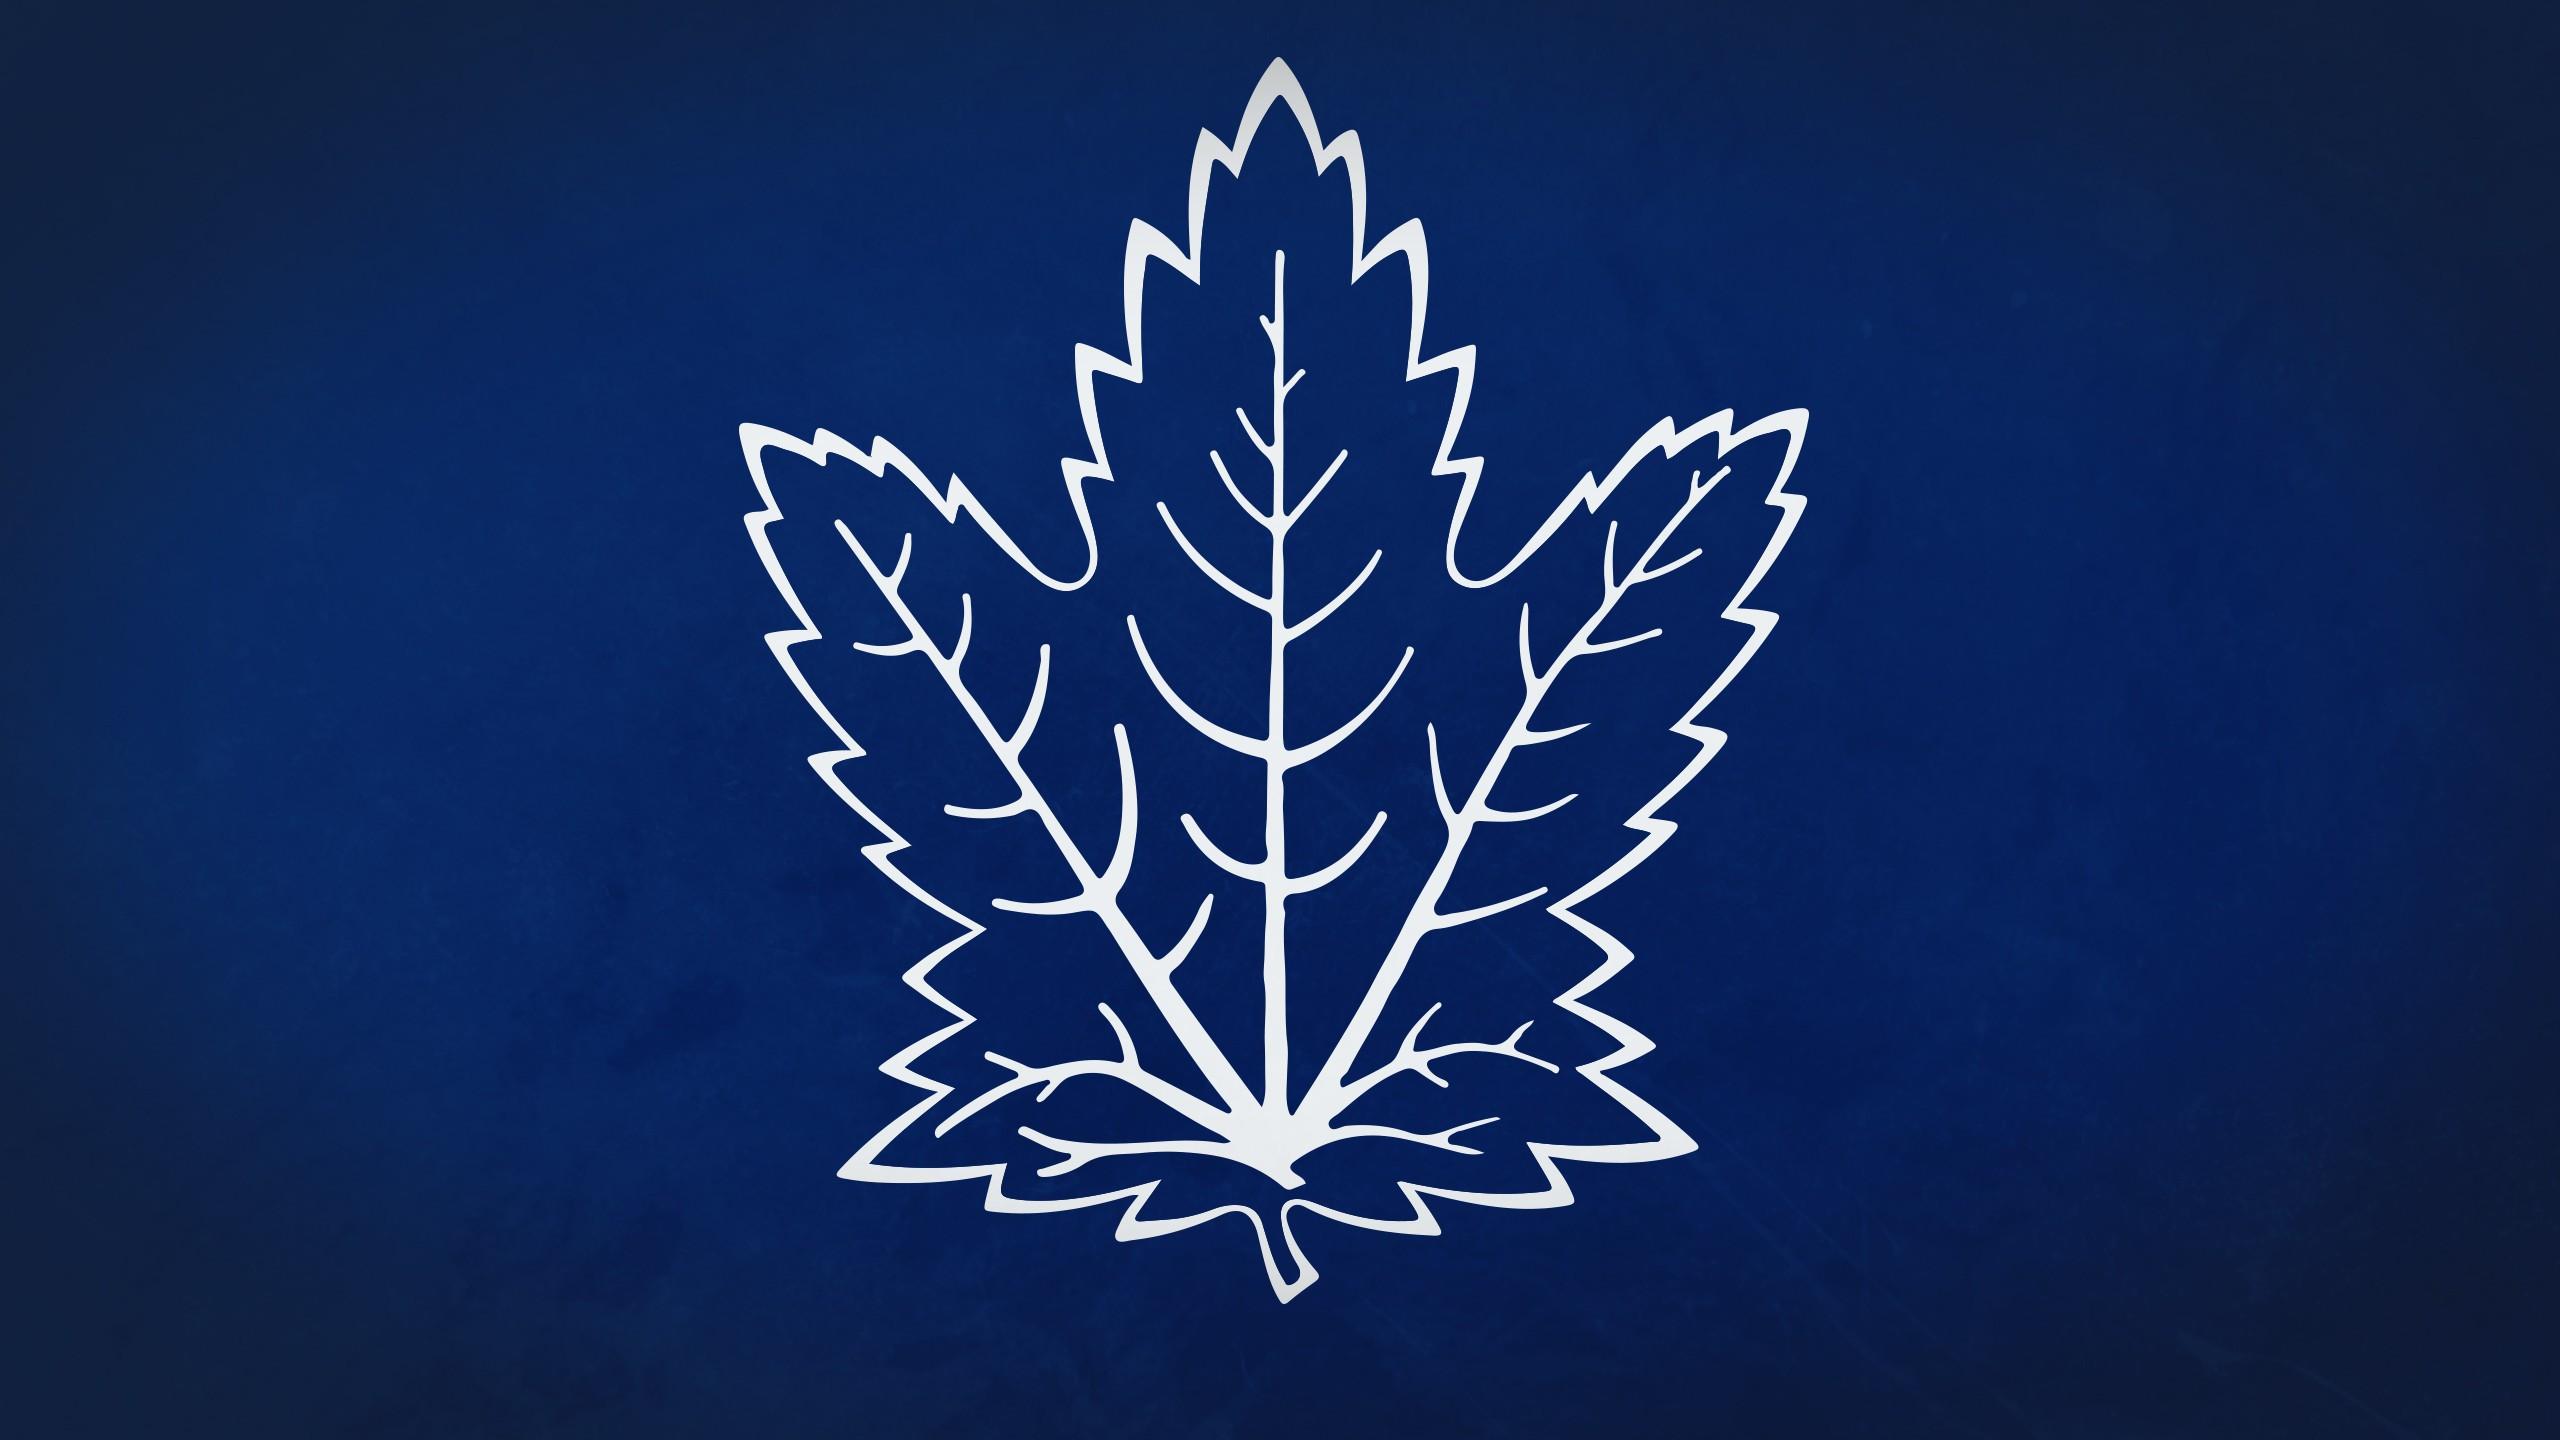 Toronto Maple Leafs Computer Wallpapers Wallpaper Cave